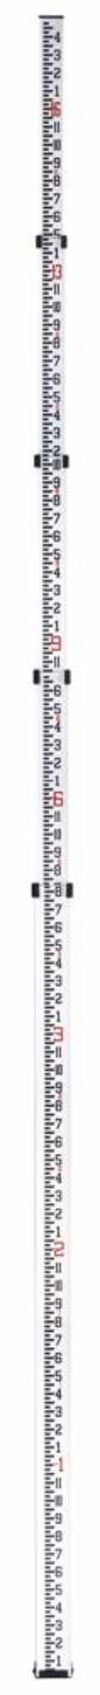 Bosch 16 Ft. Telescoping Leveling Rod, small